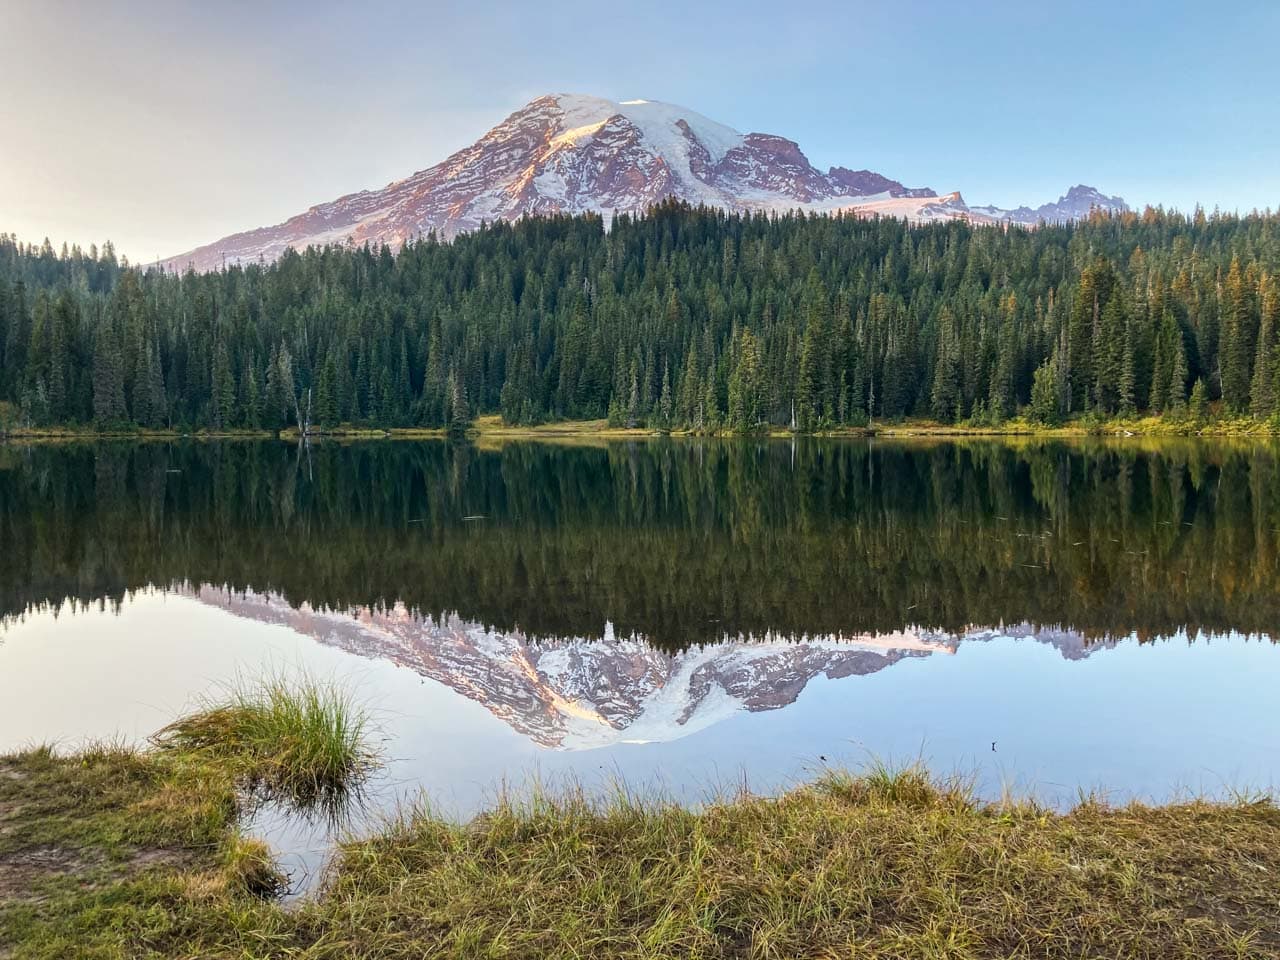 Reflection Lakes is one of the top sunset spots in Mount Rainier Natioanl Park